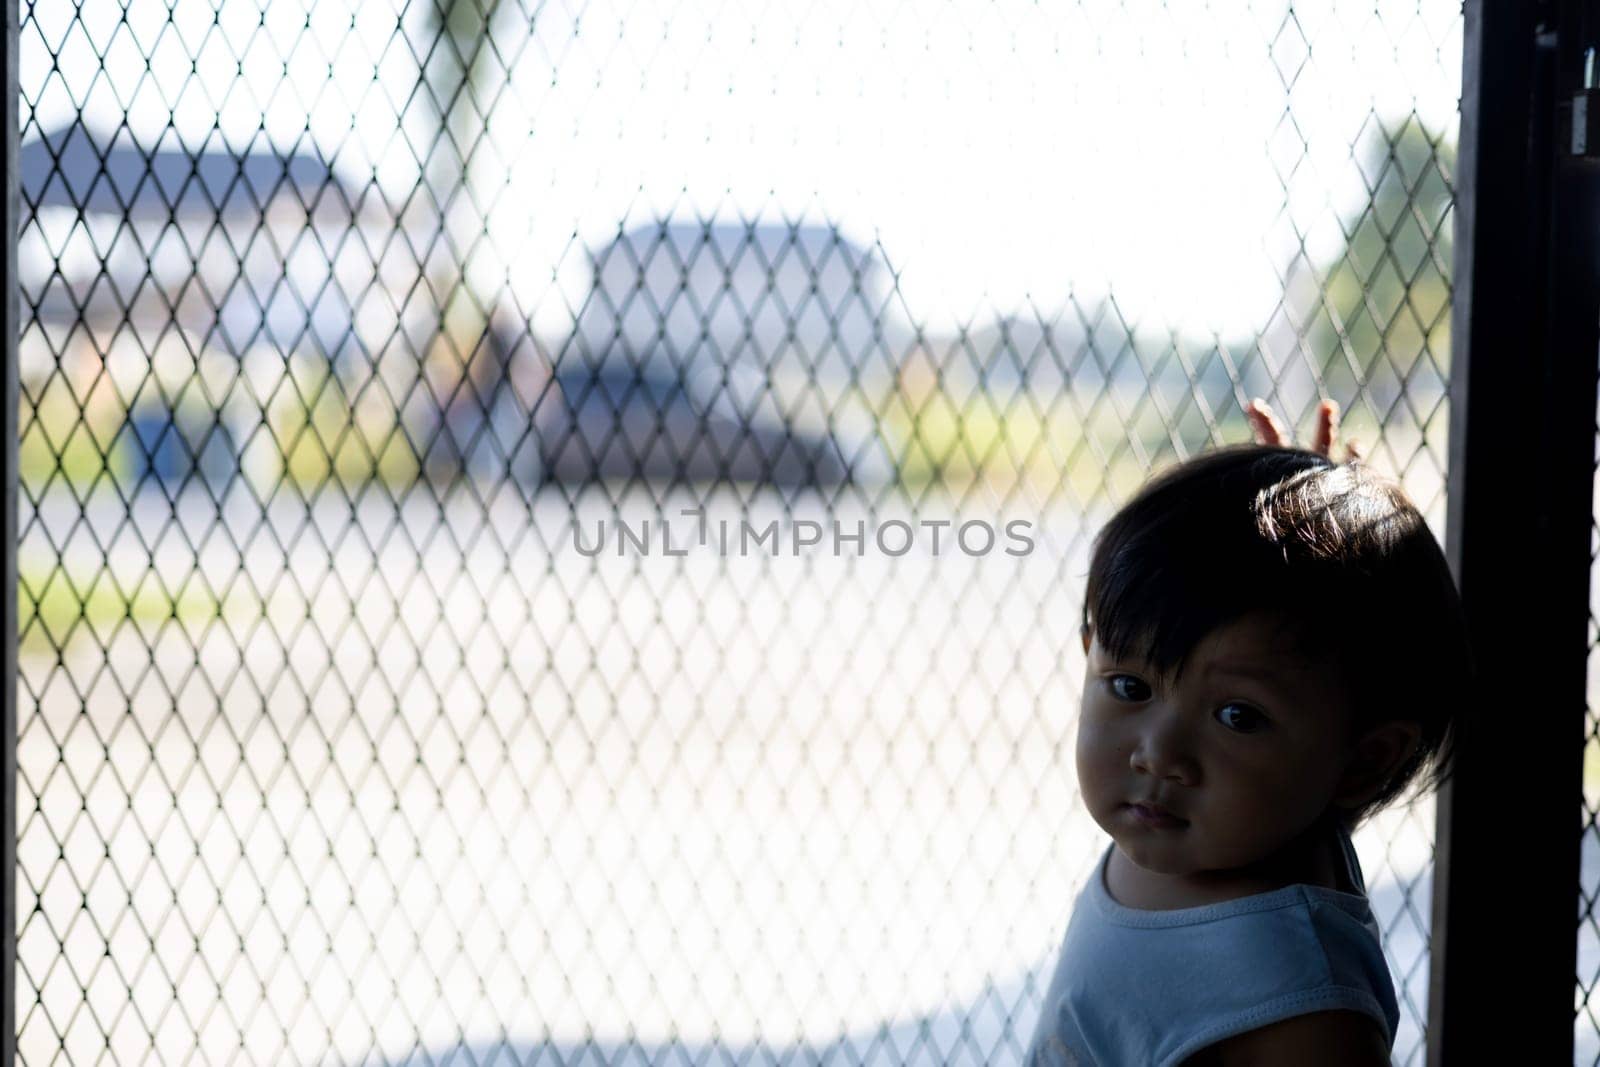 The boy is holding his hands on the fence. The Boy Holds On To The Iron Fence With His Hand. The boy stands behind the fence with emotional expression.